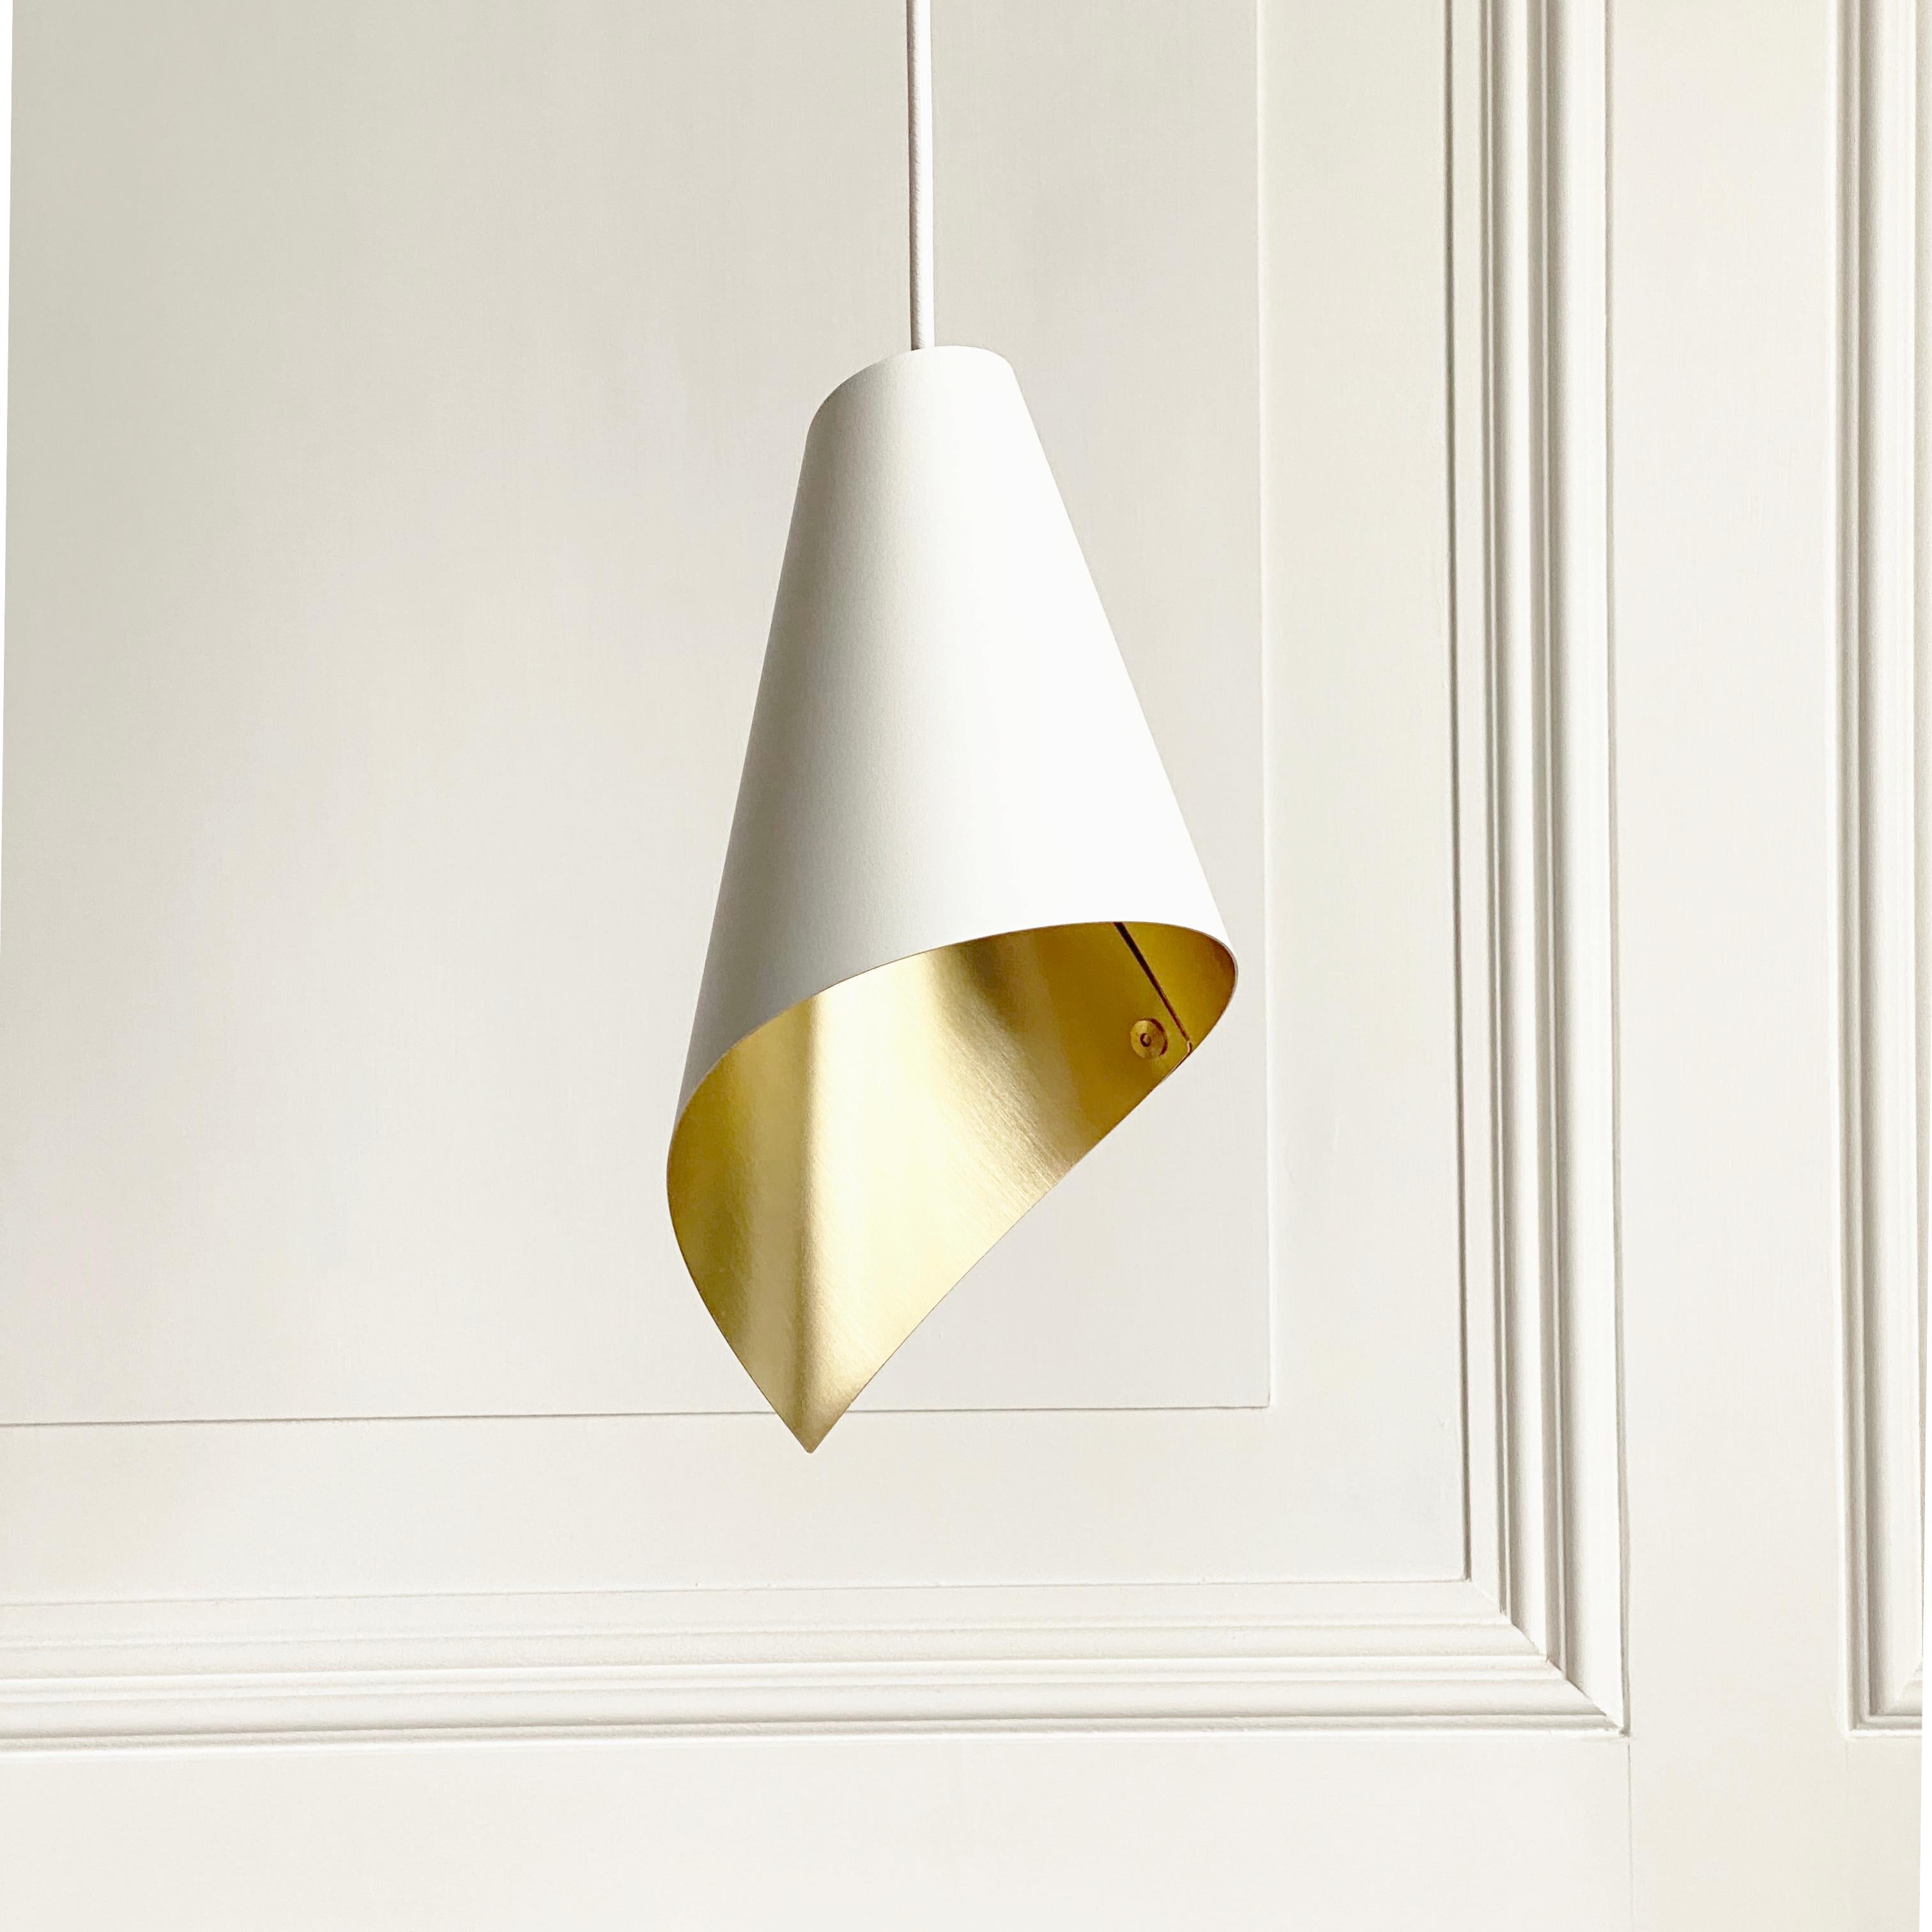 The white & brushed brass ARC pendant light can be used in many different configurations to stunning effect. Hang singles or in rows to create individual pools of light or in clusters of 3 or 5 to give wider illumination.

Hand wrapped from a single